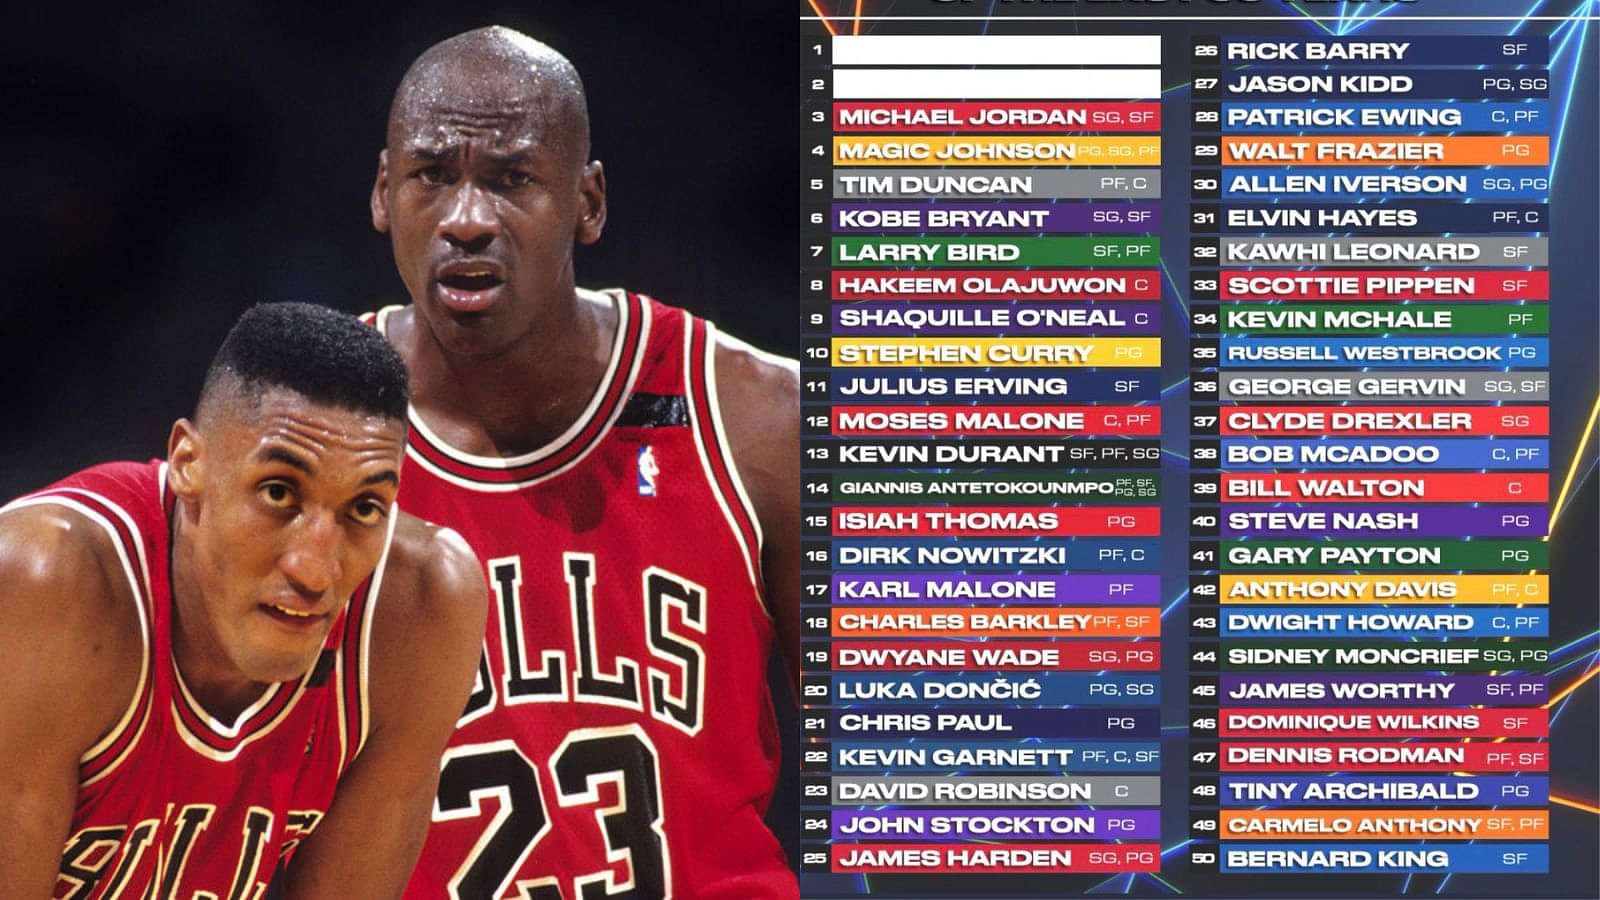 Create your own personal Top 50 NBA players list - Pounding The Rock